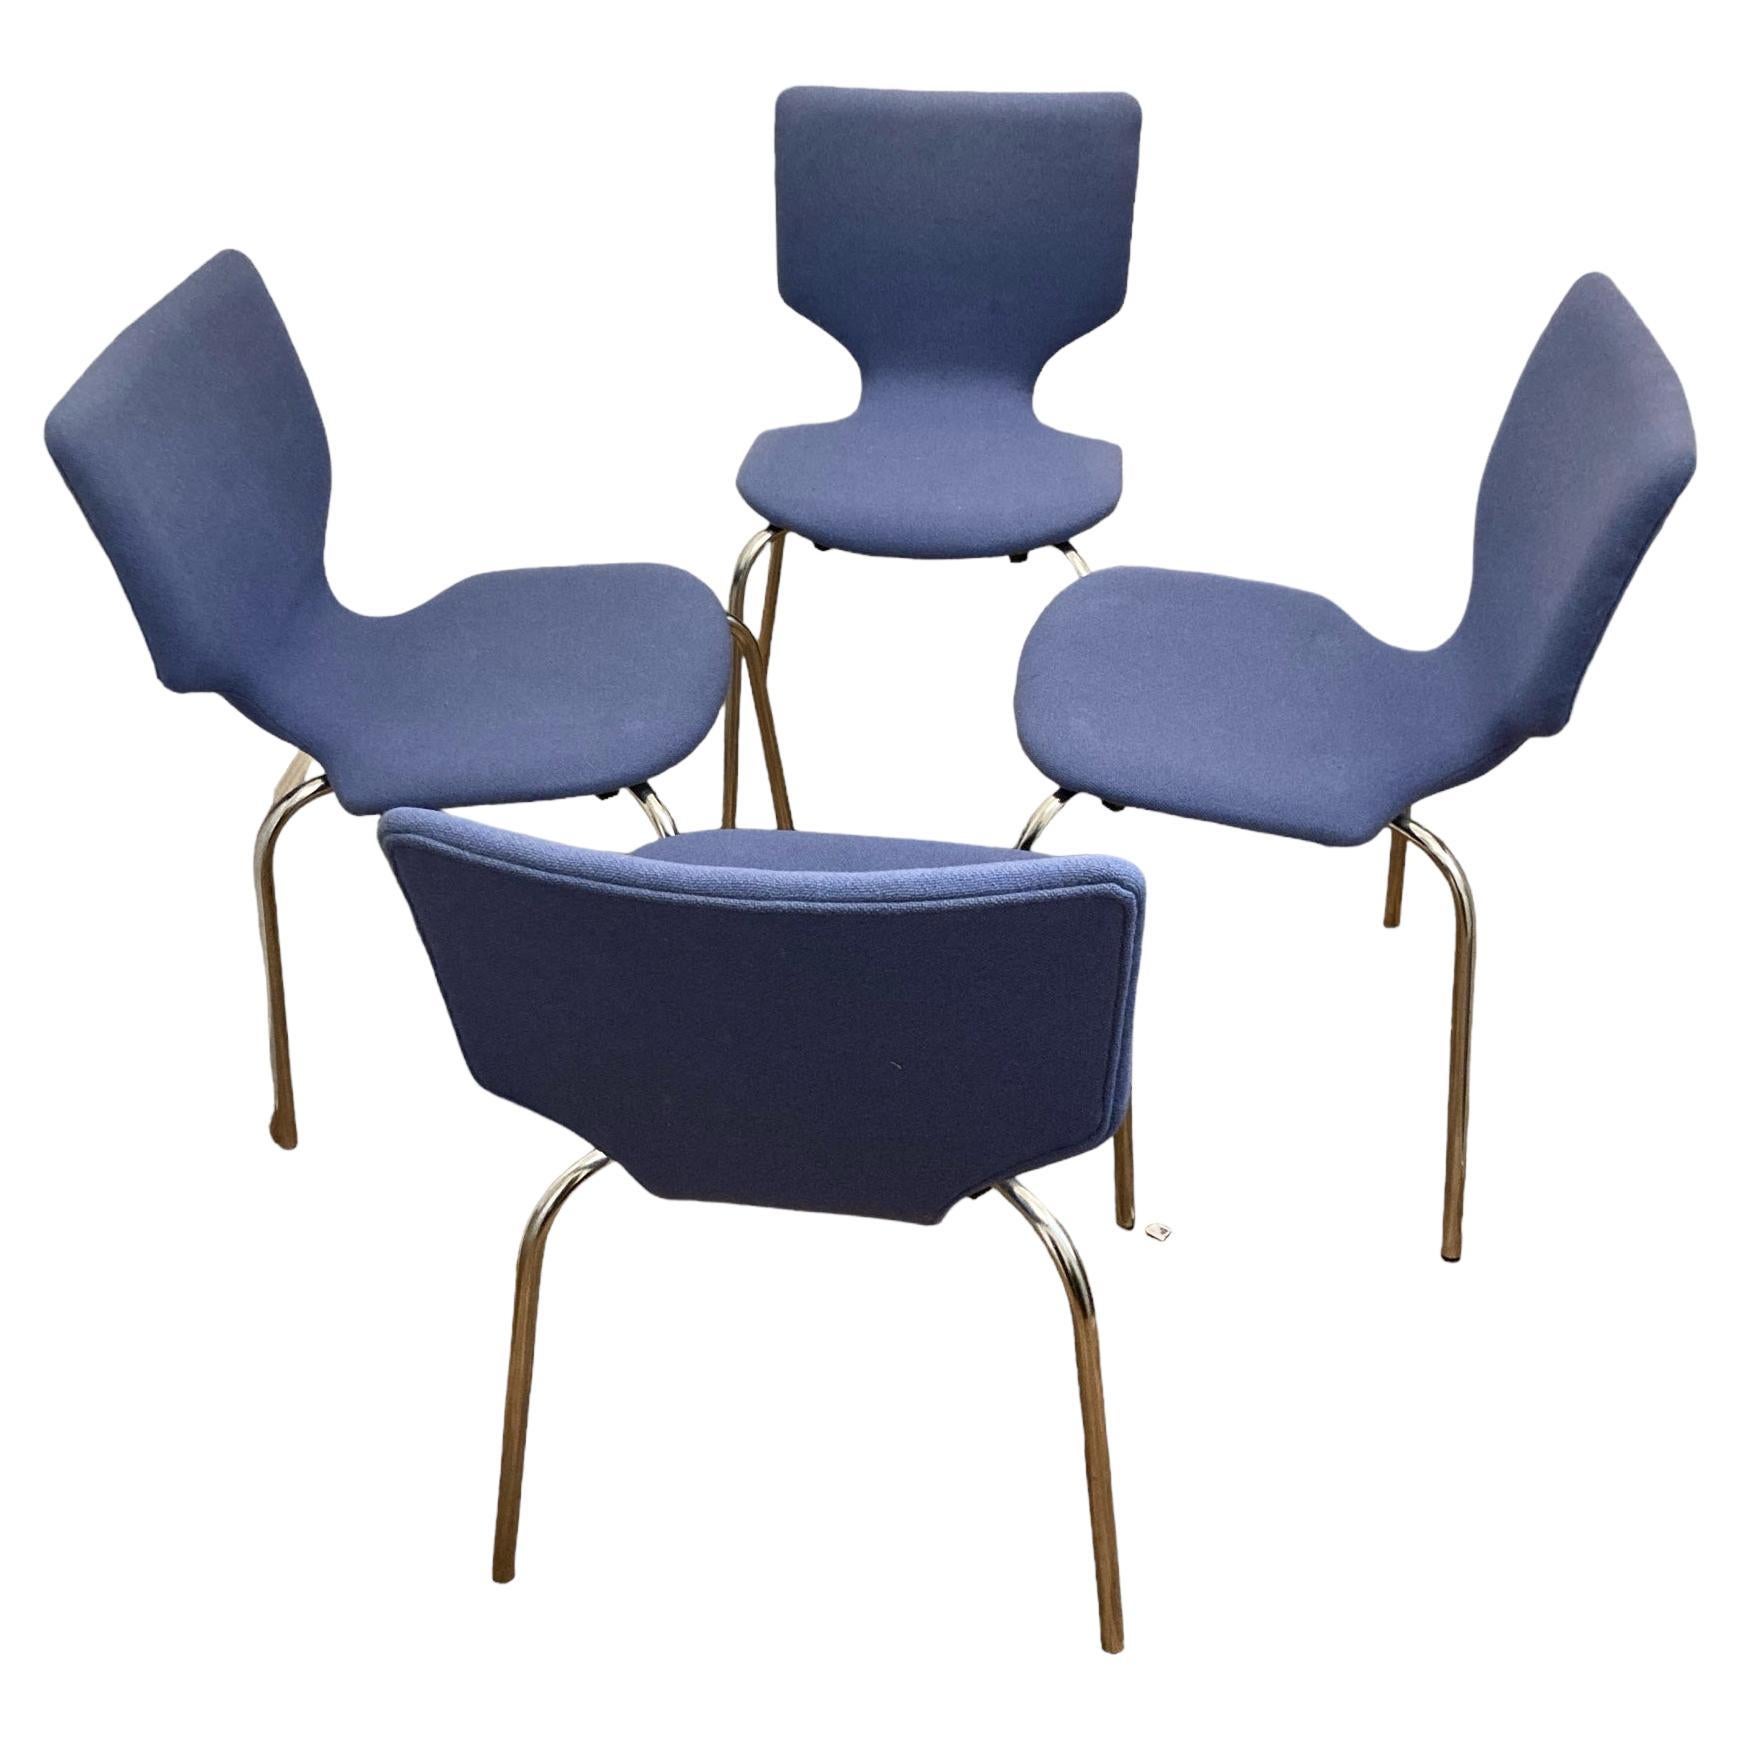 Set of four Mid Century Style Danish Duba Mobelindustri Conference Chairs (1995) For Sale